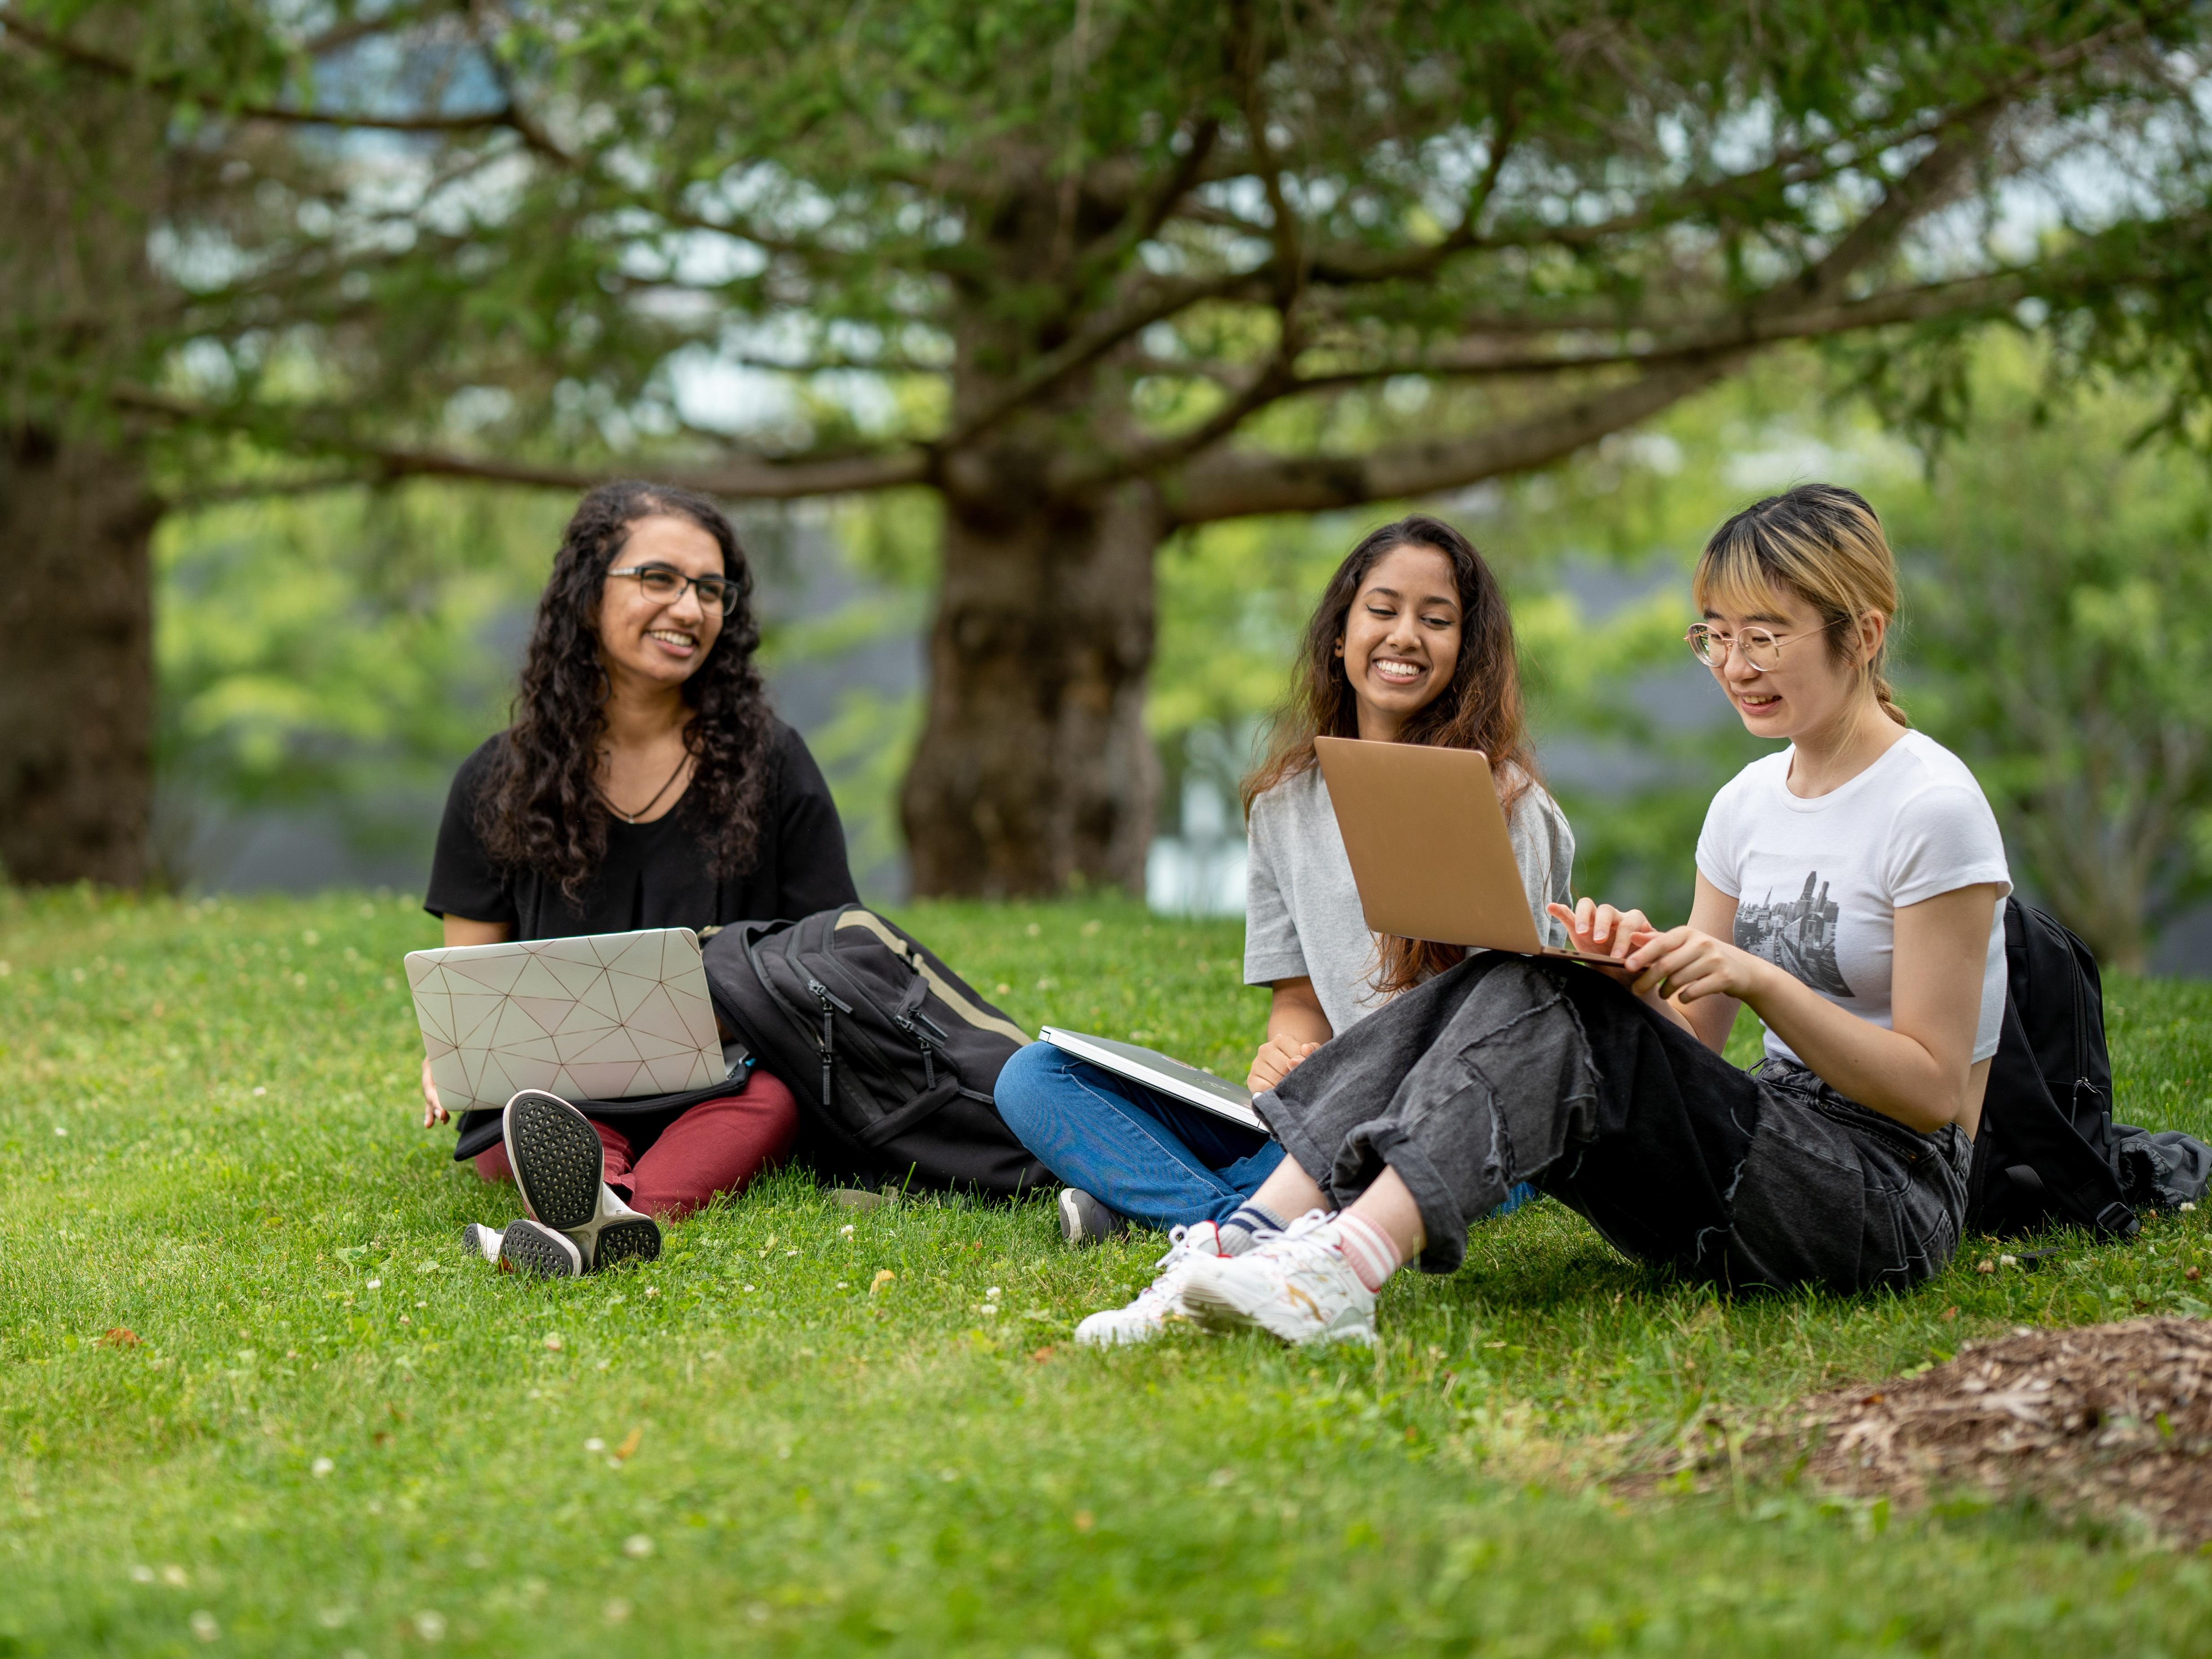 Three students outside under a tree, working on laptops and chatting.